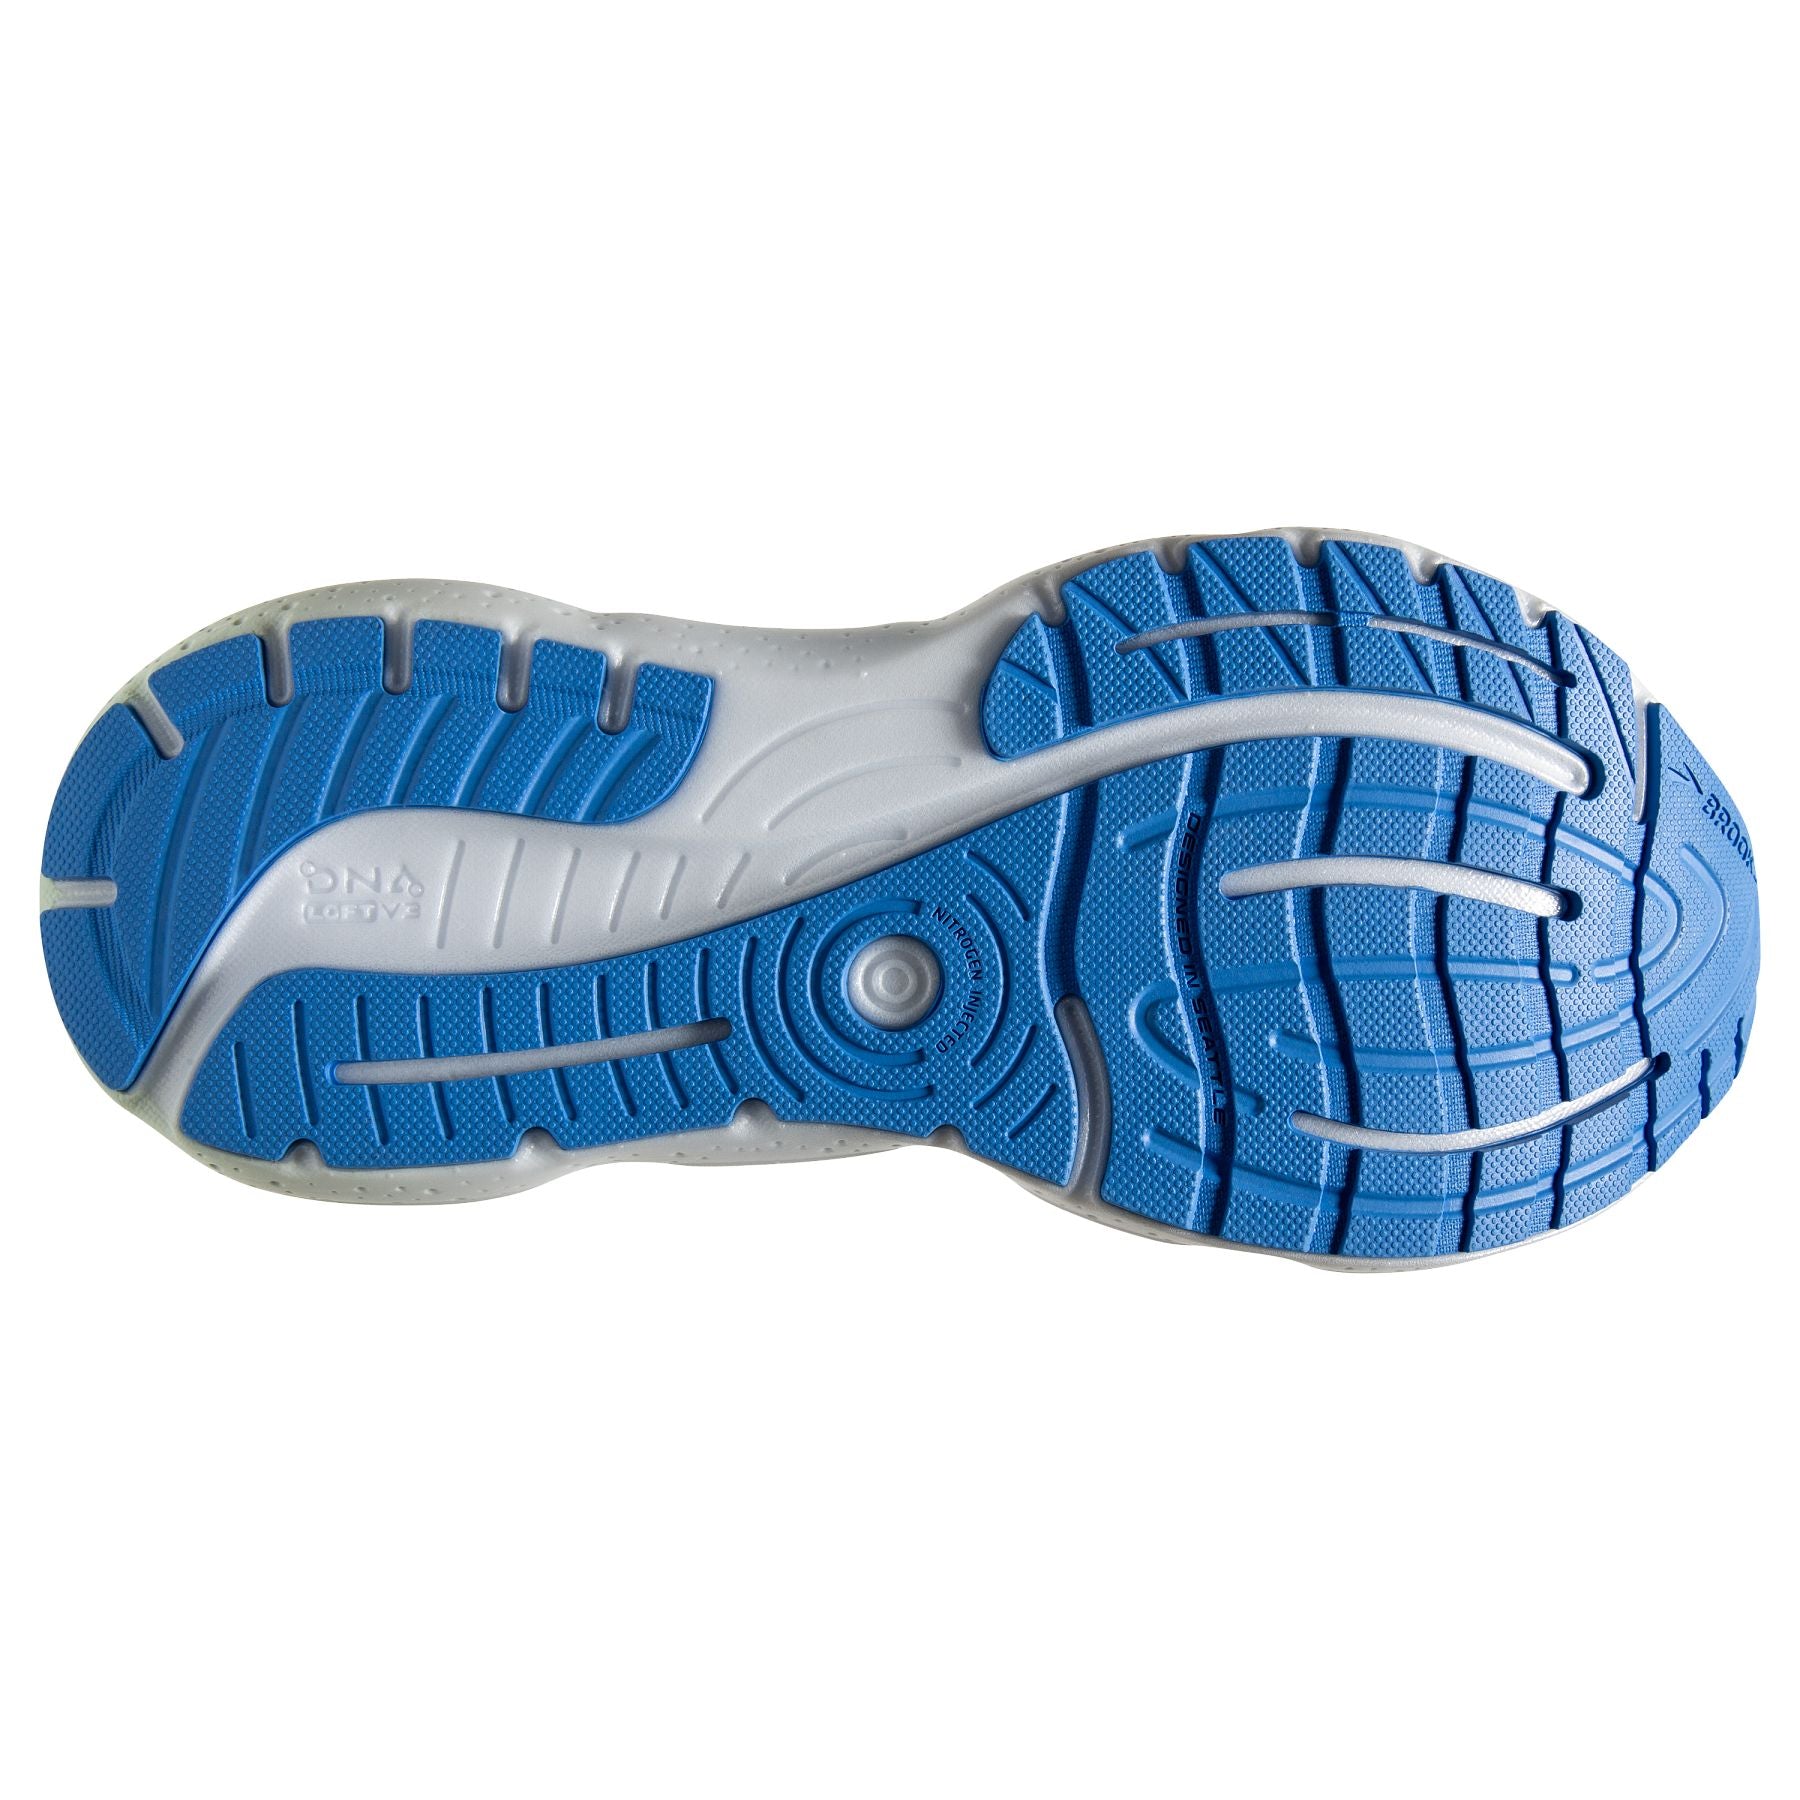 Bottom (outer sole) view of the Women's Glycerin GTS 20 by Brook's in the color Blue Glass/Marina/Legion Blue